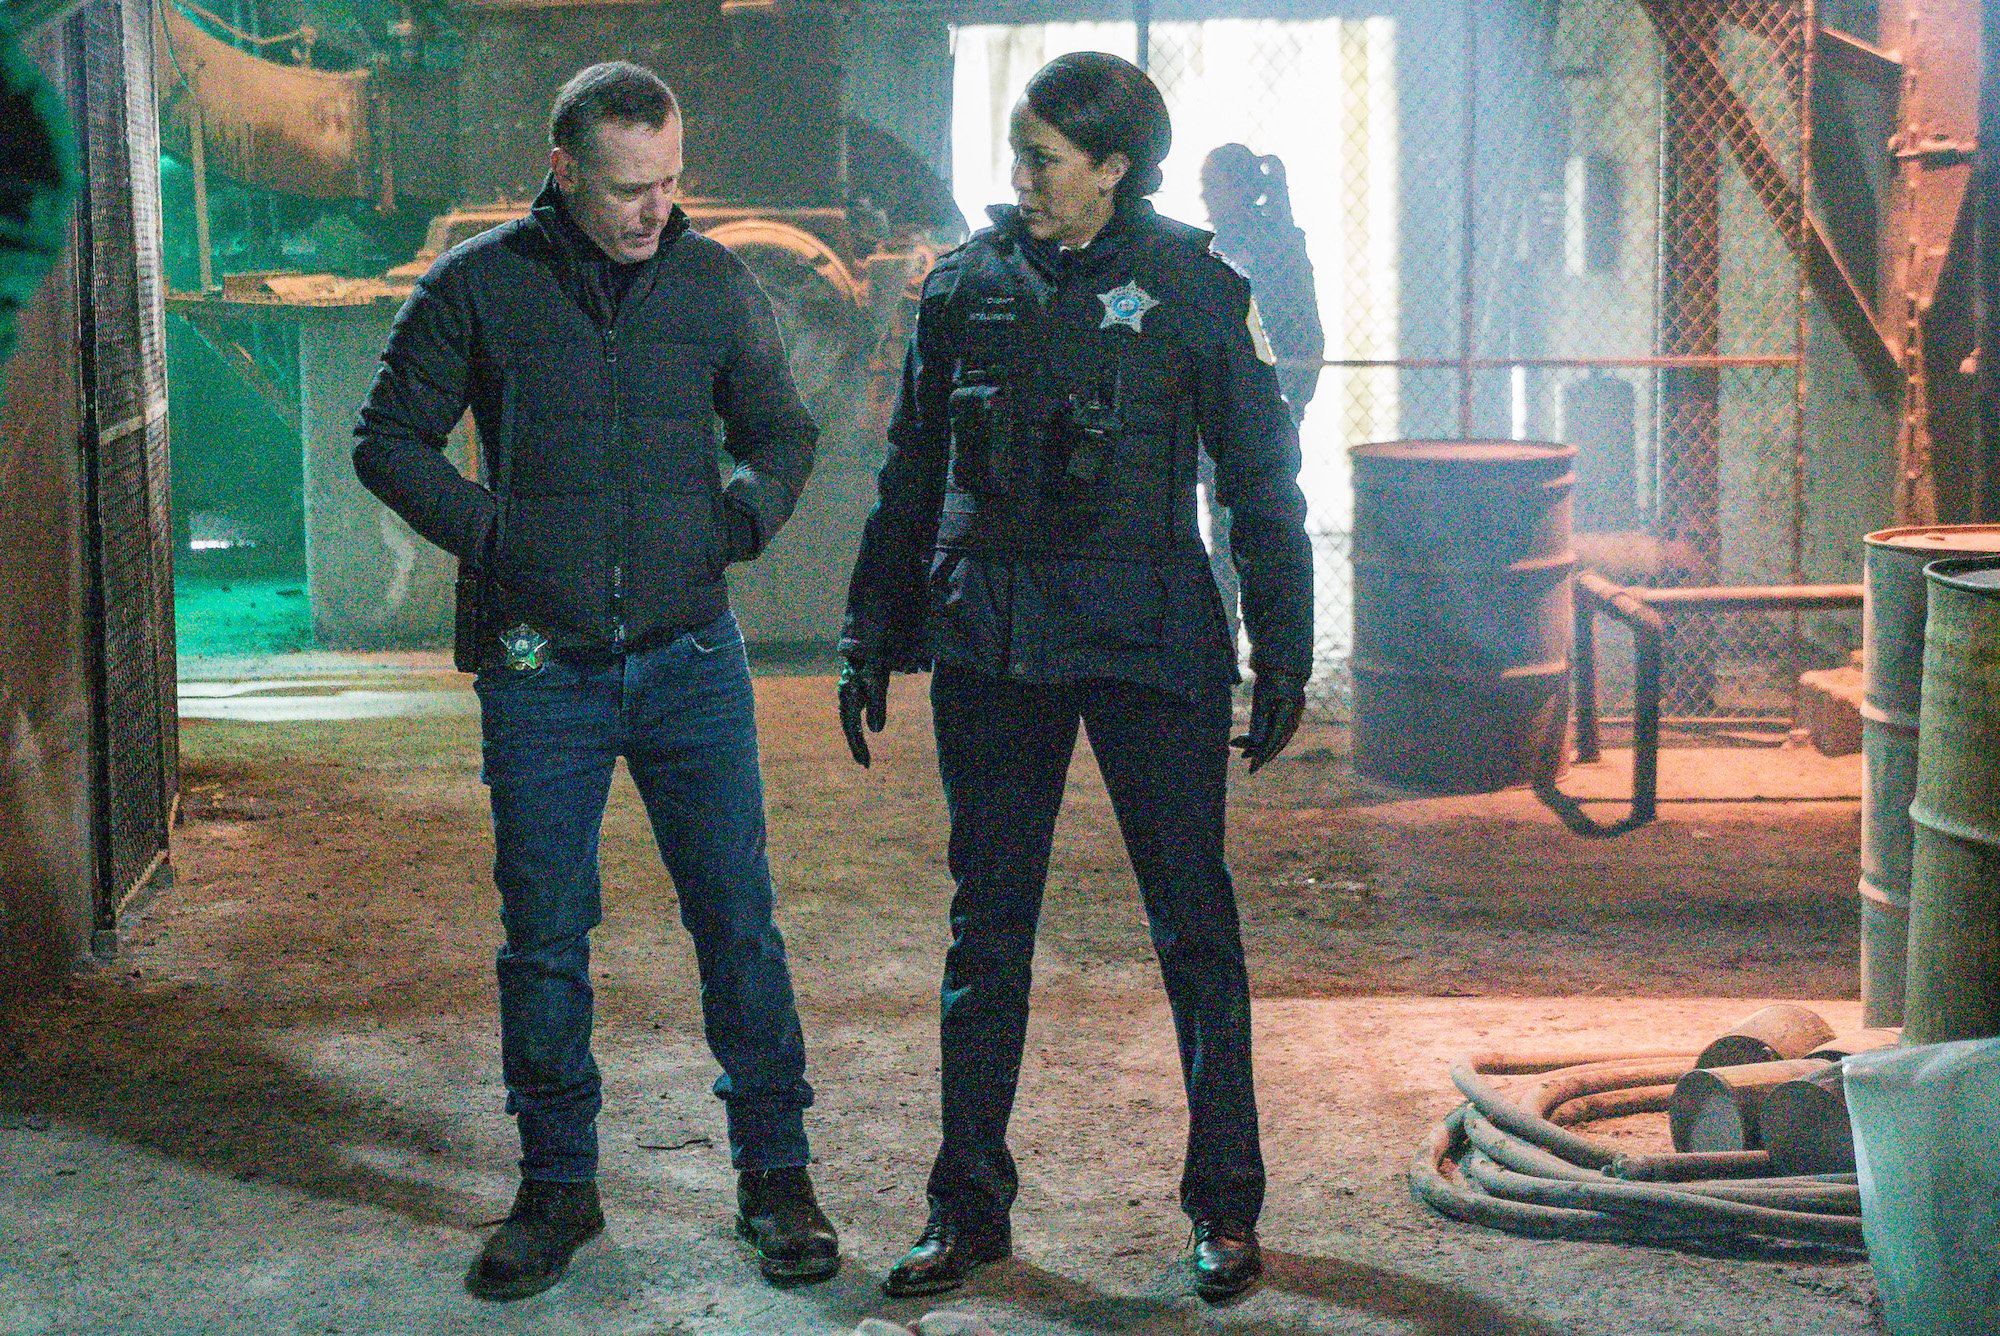 (L-R) Jason Beghe as Hank Voight and Nicole Ari Parker as Samantha Miller standing in an industrial space